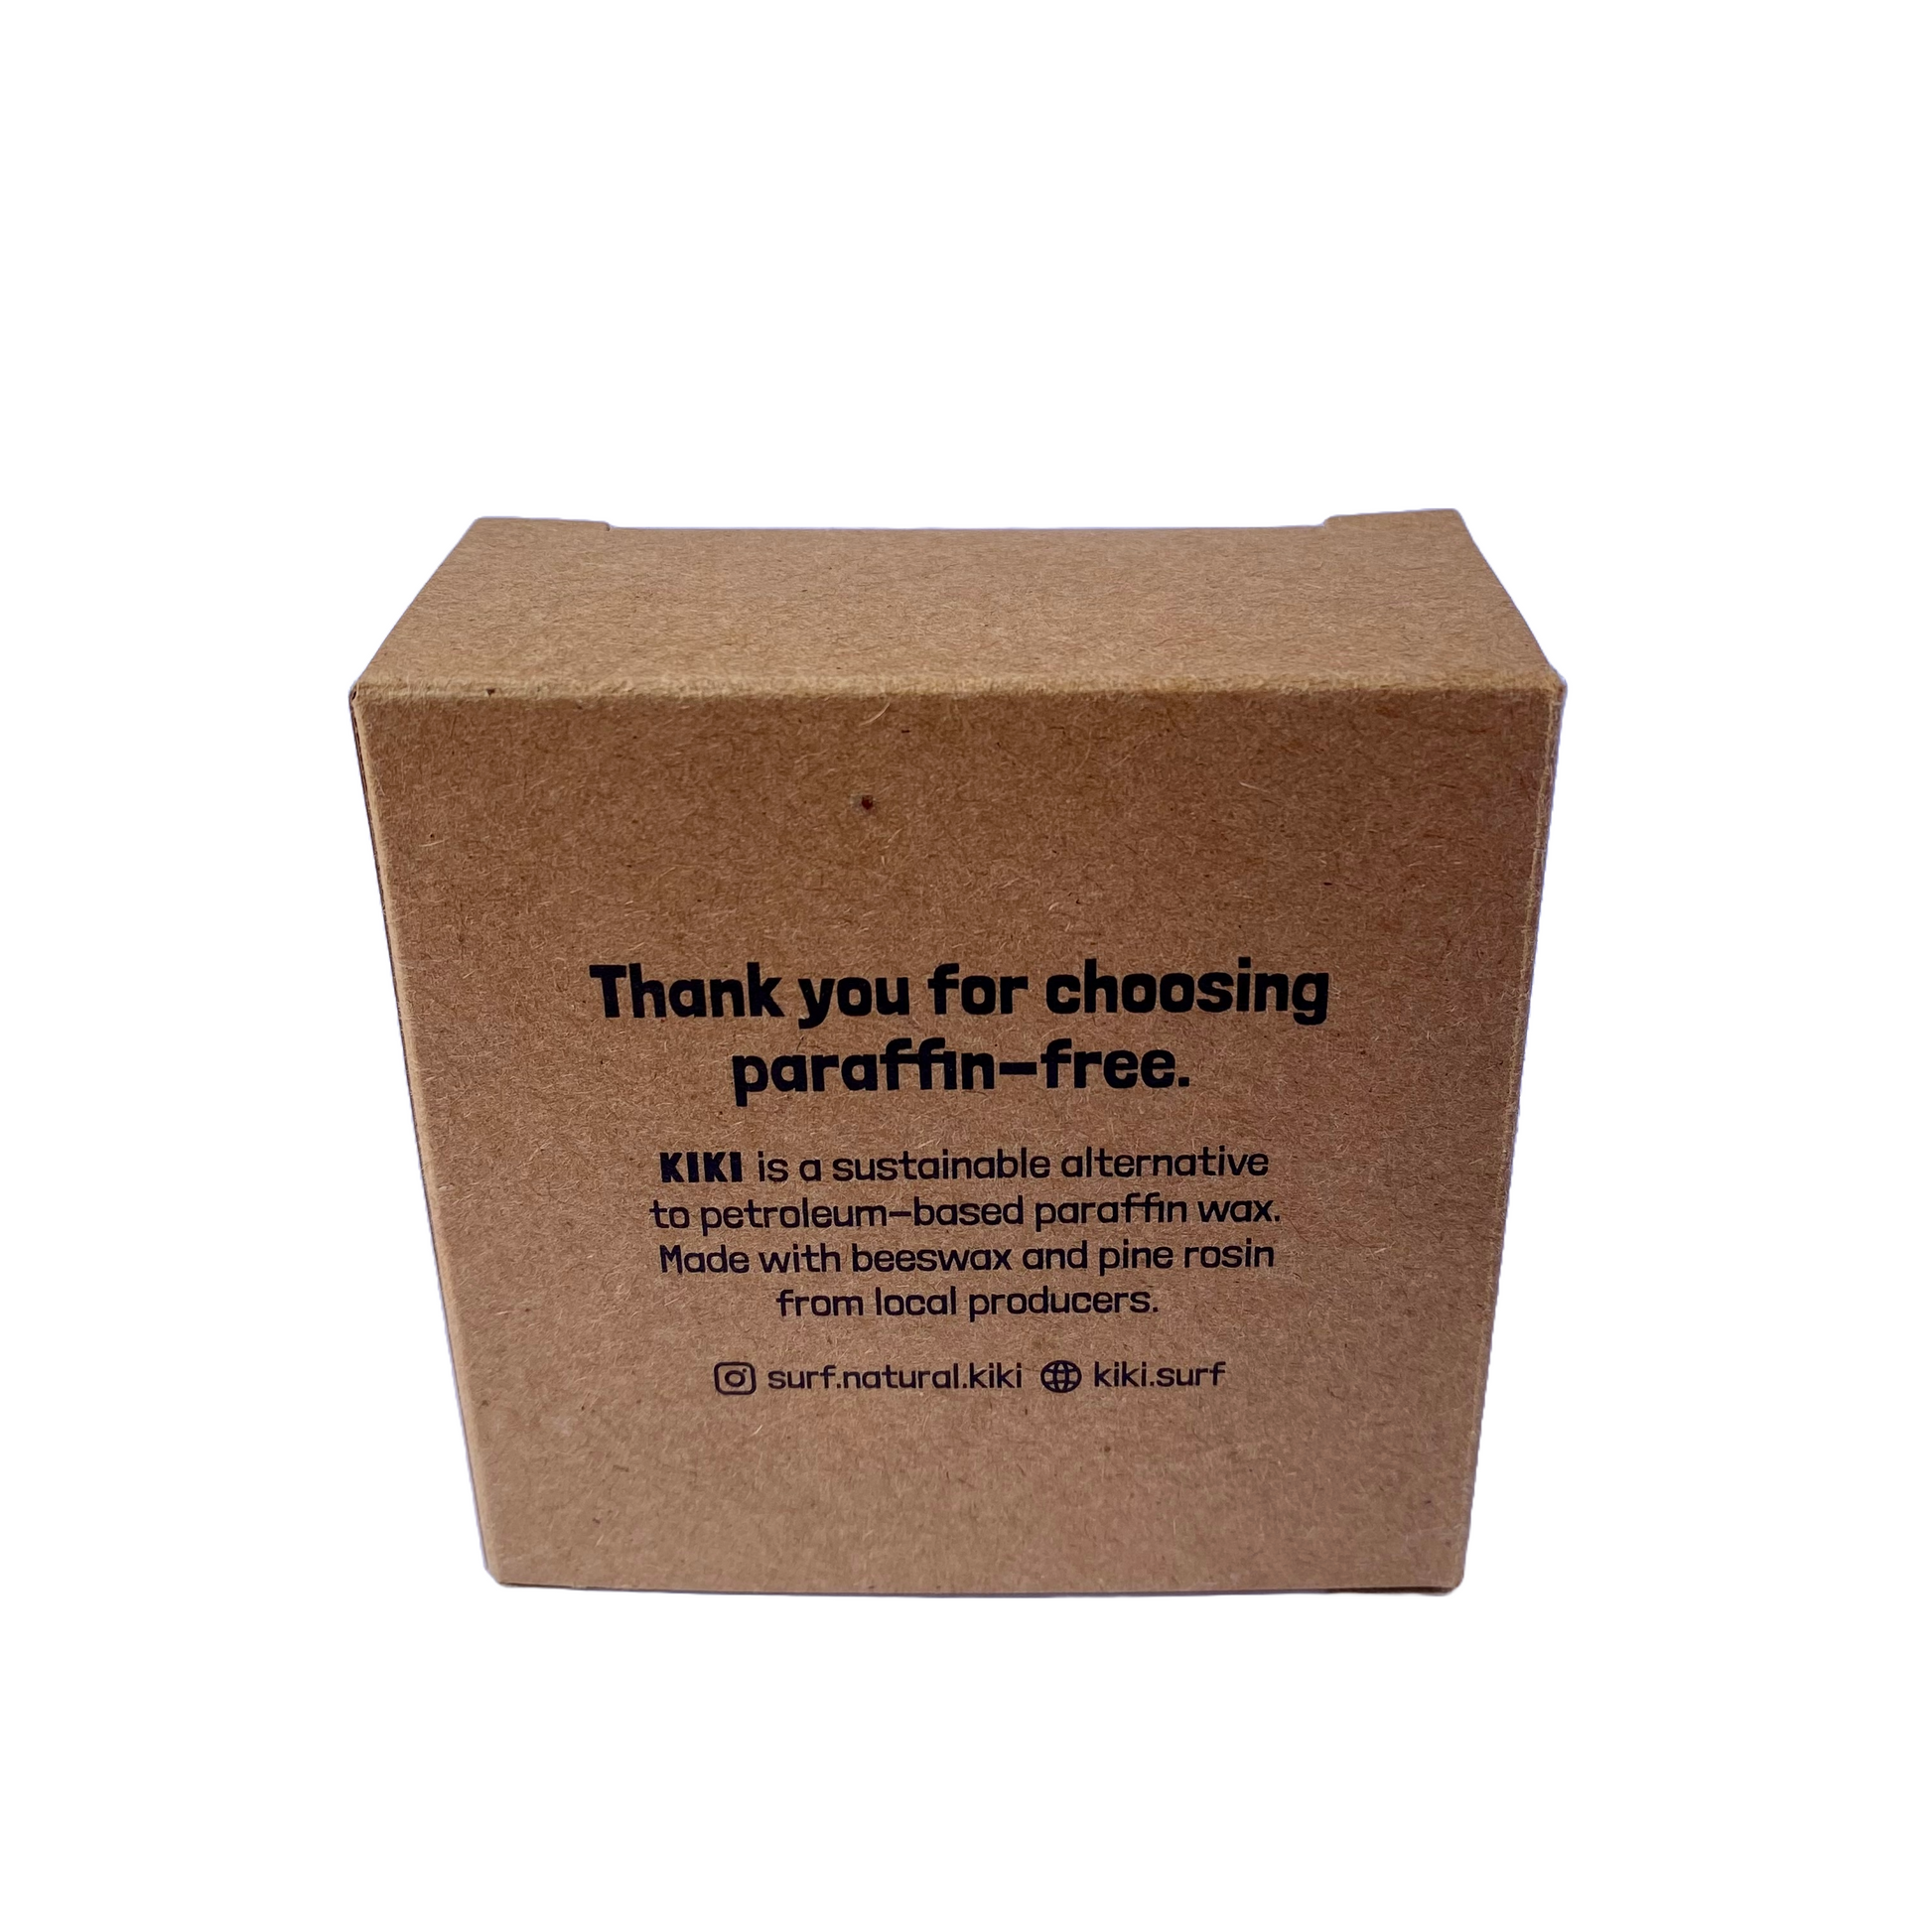 Image of a box of natural reef safe surf wax. The writing on the box reads "KIKI is a sustainable alternative to petroleum-based paraffin wax. Made with beeswax and pine rosin from local producers". 